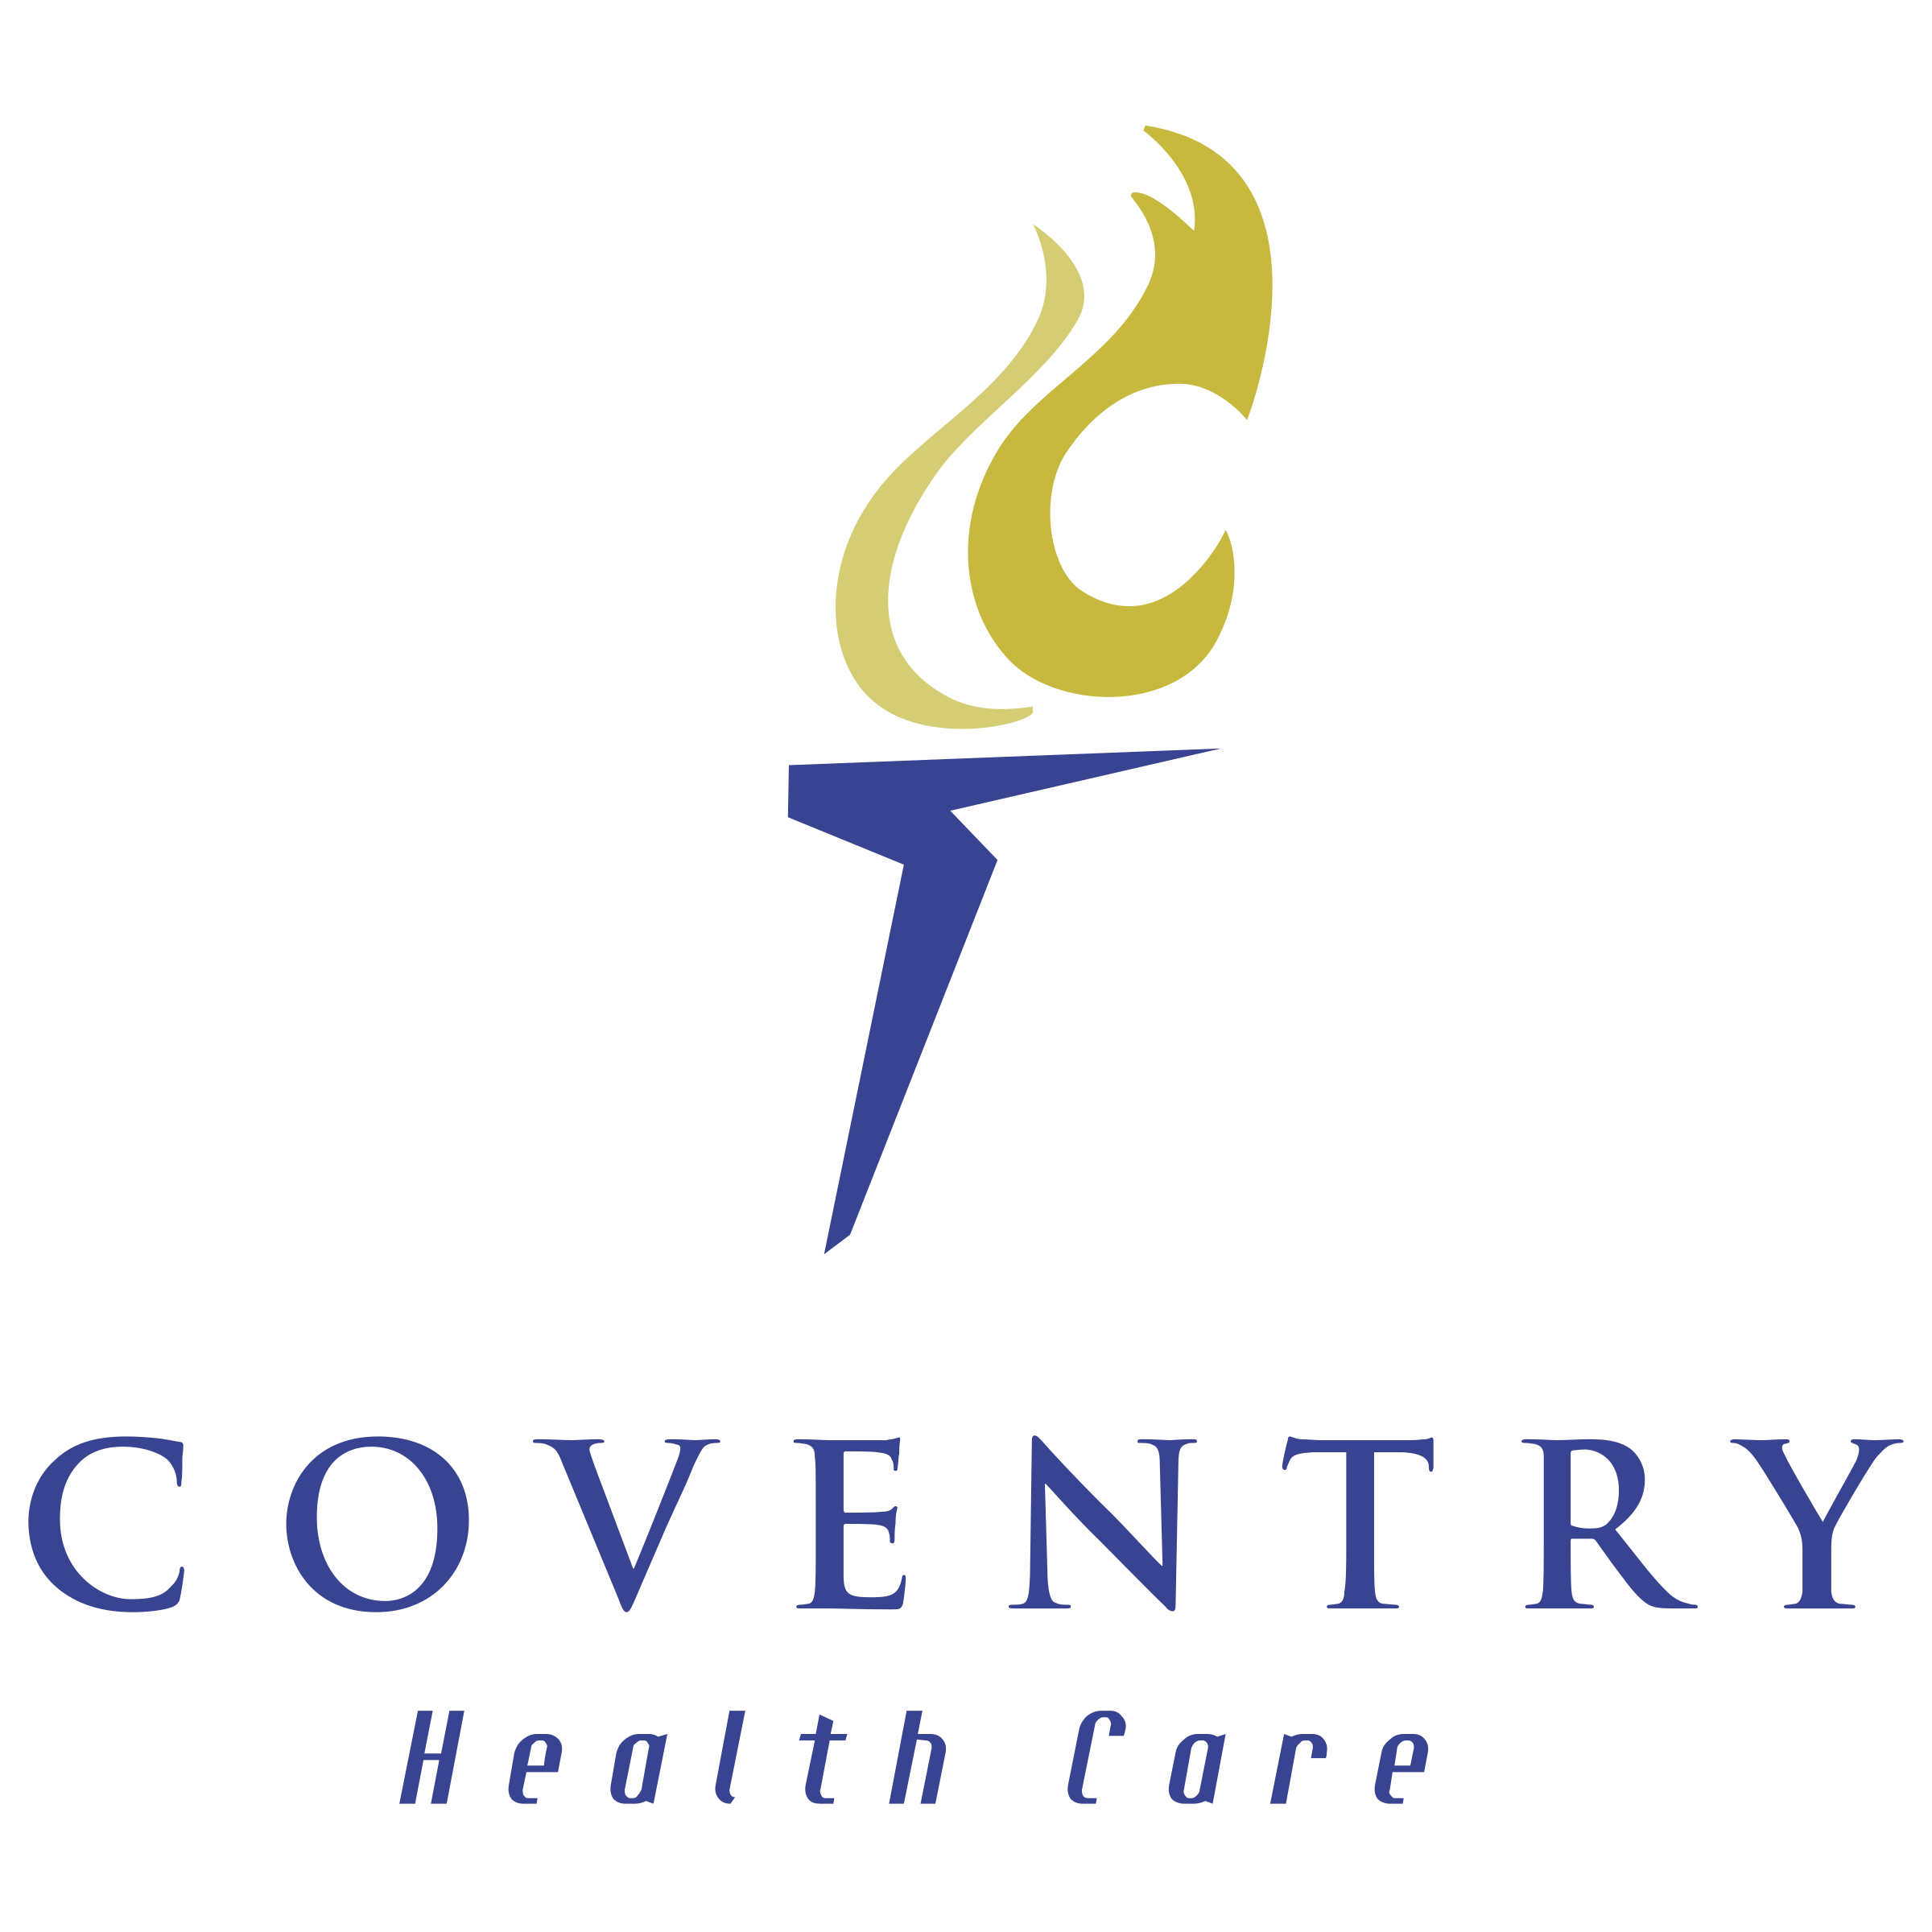 coventry-health-care-logo-png-transparent.png